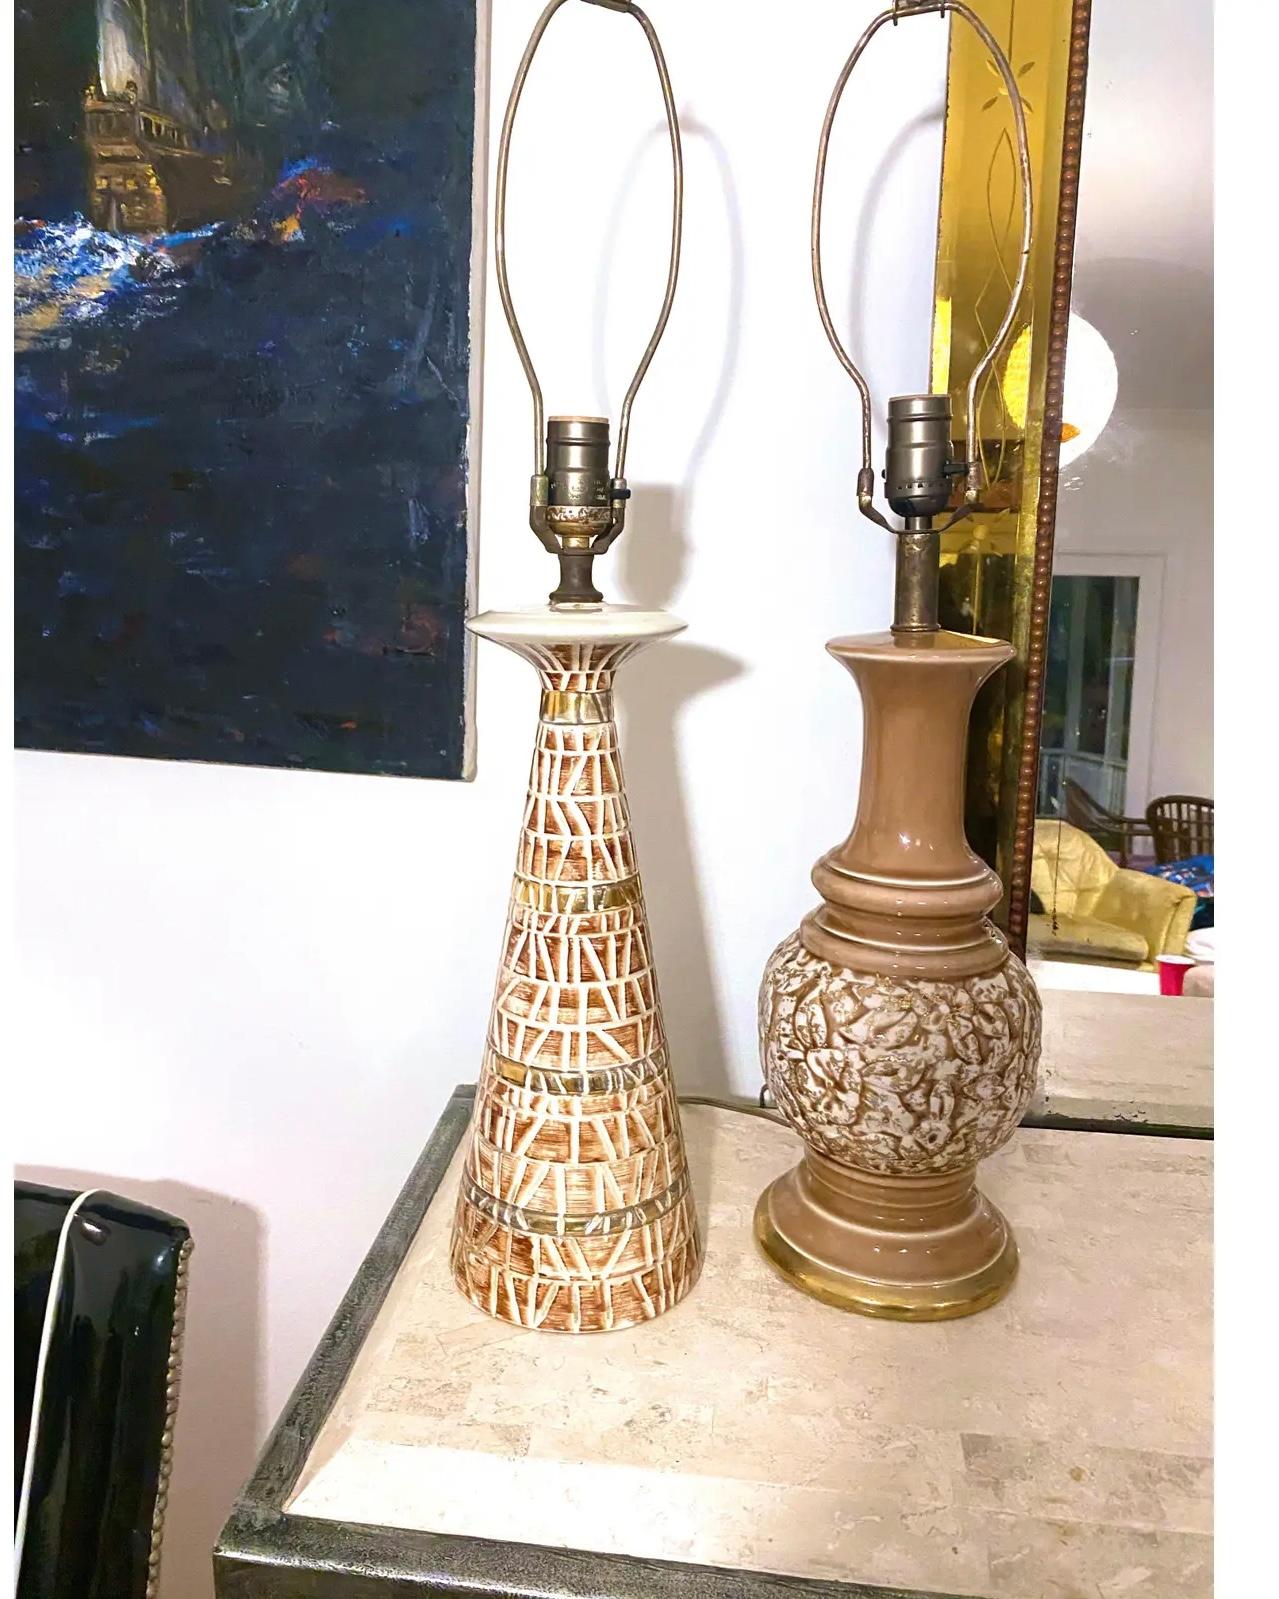 Vintage Mid-Century Modern Pottery Gold and Cream MIX Match Lamps - a Pair
 1